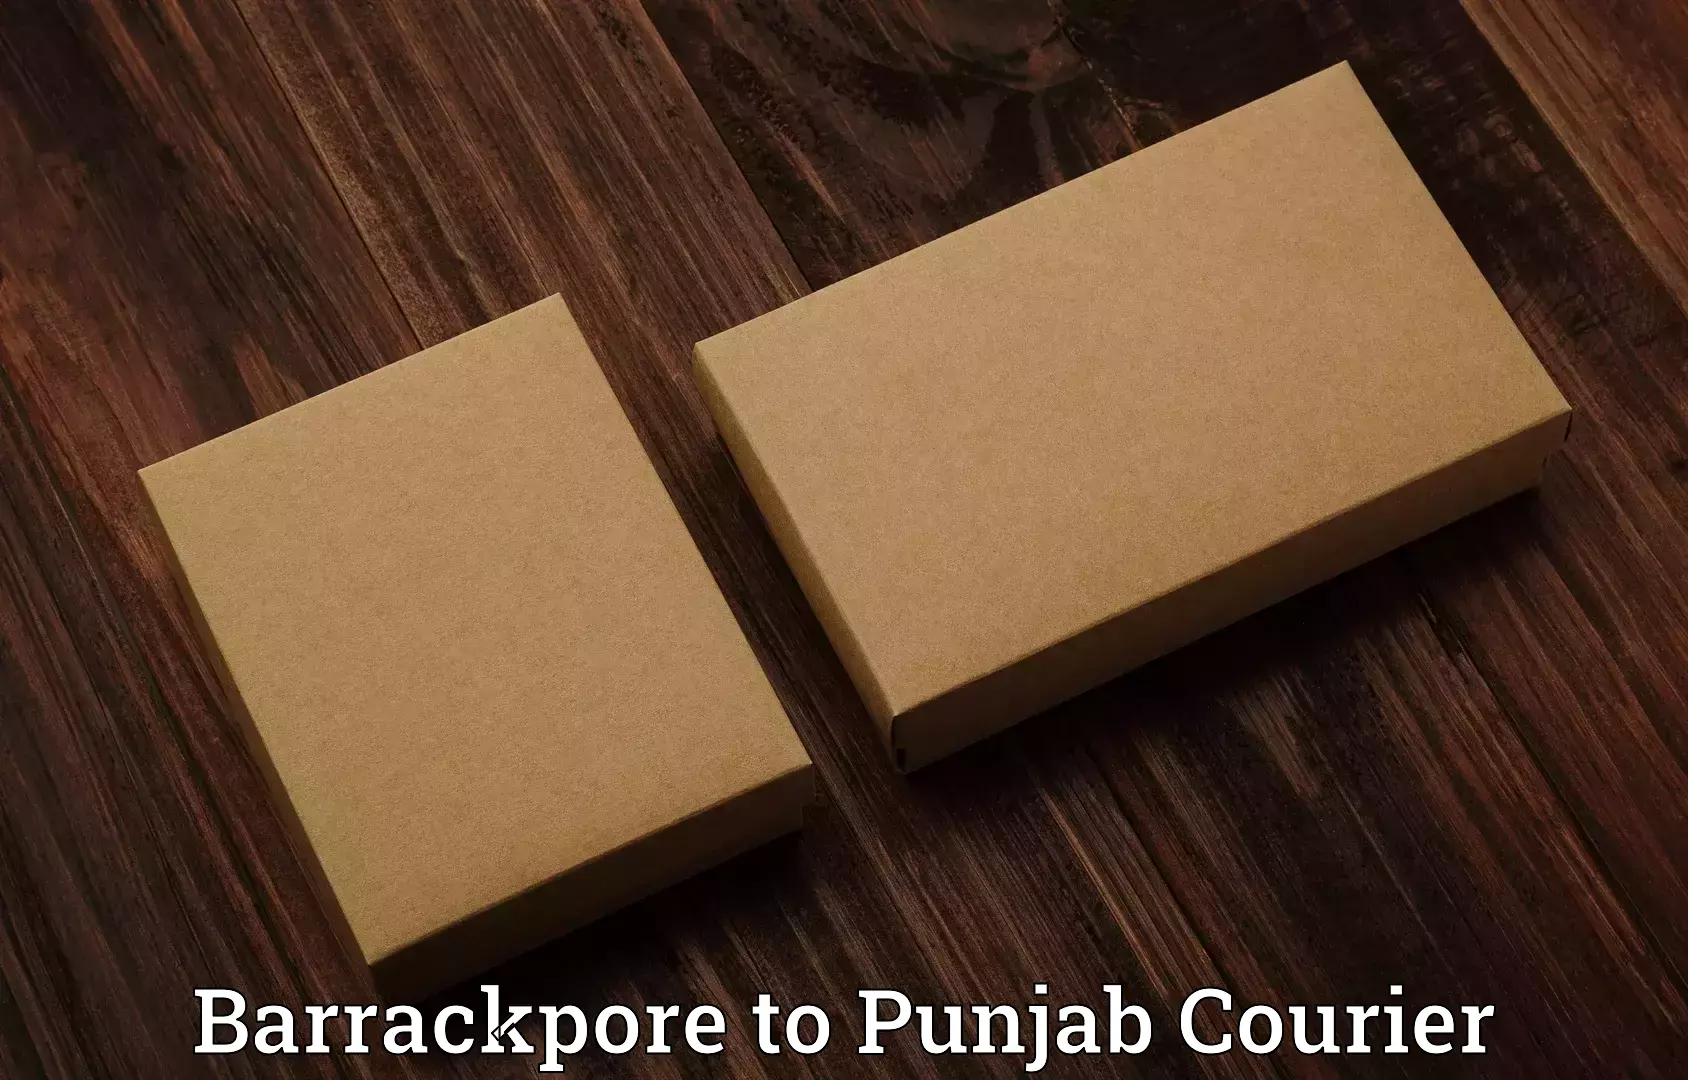 Luggage shipment specialists Barrackpore to Patiala